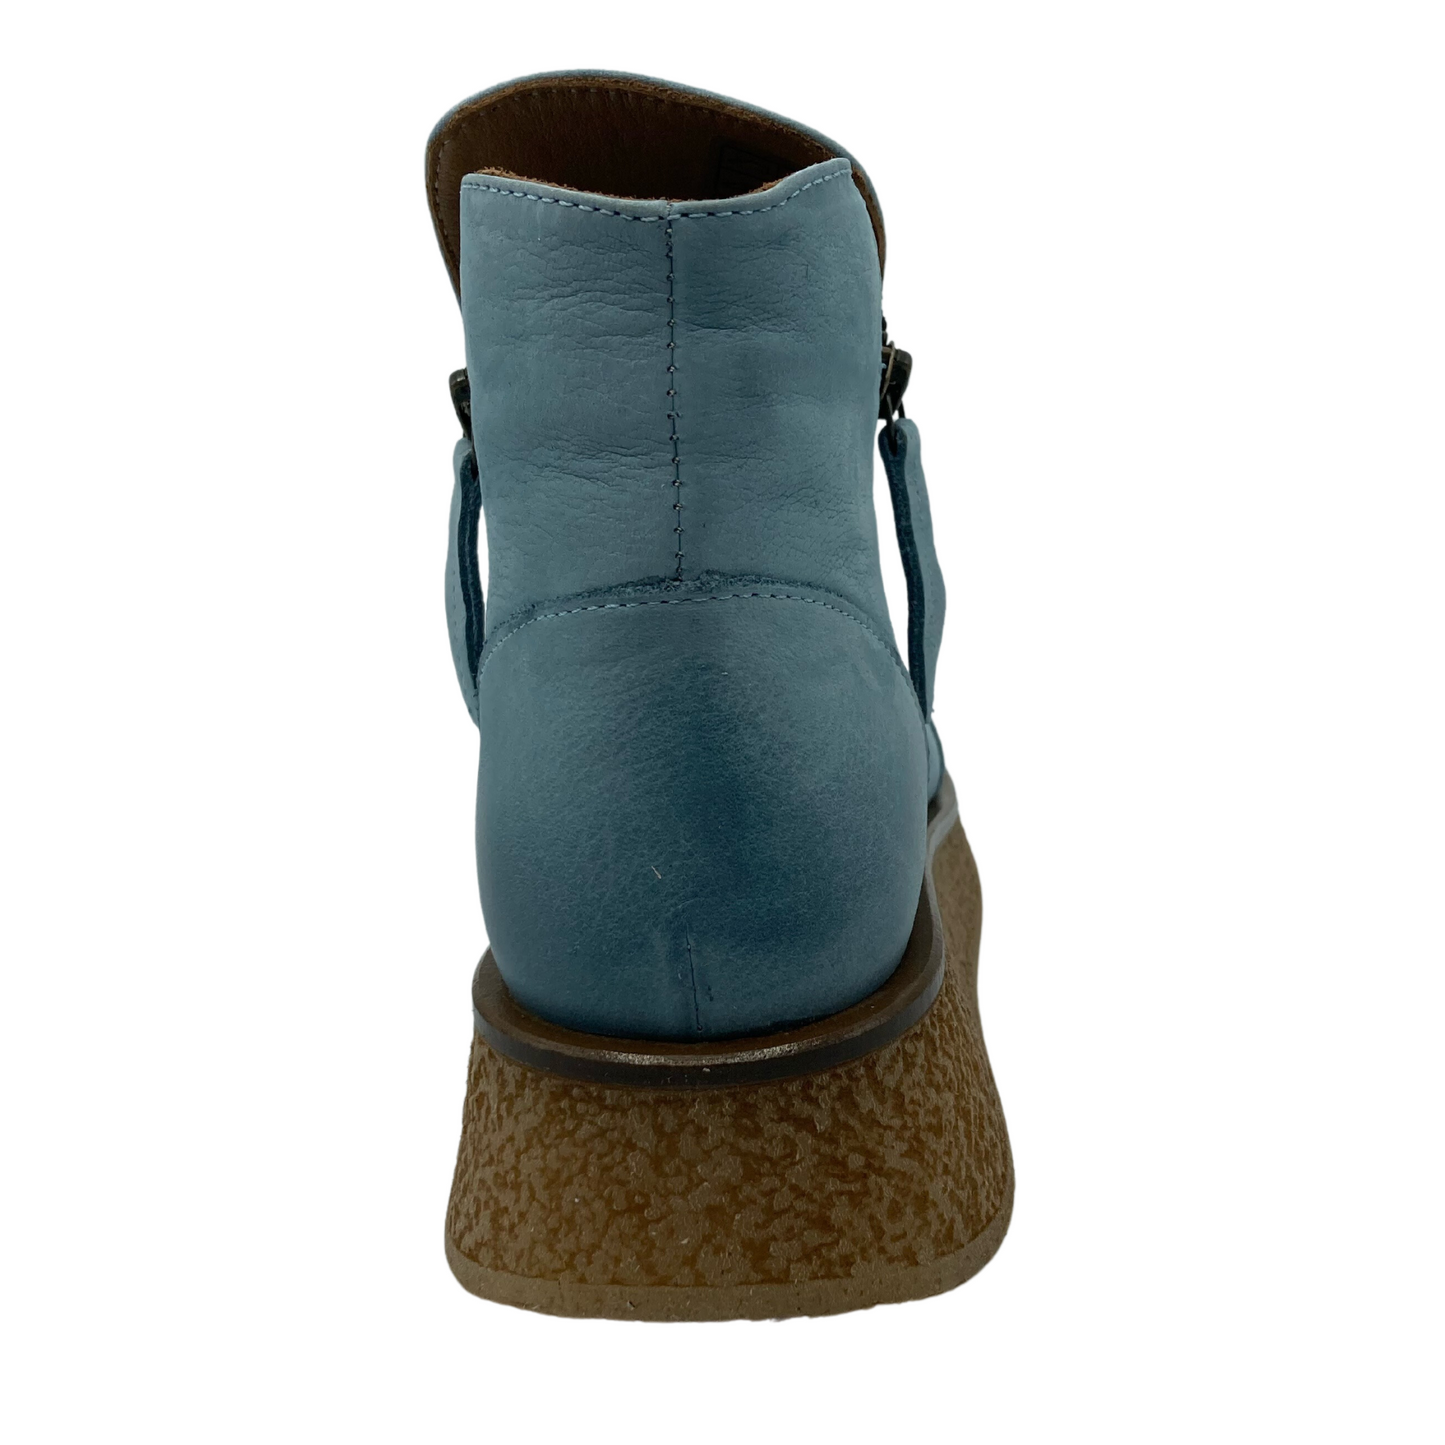 Back view of sky blue ankle boot with platform outsole